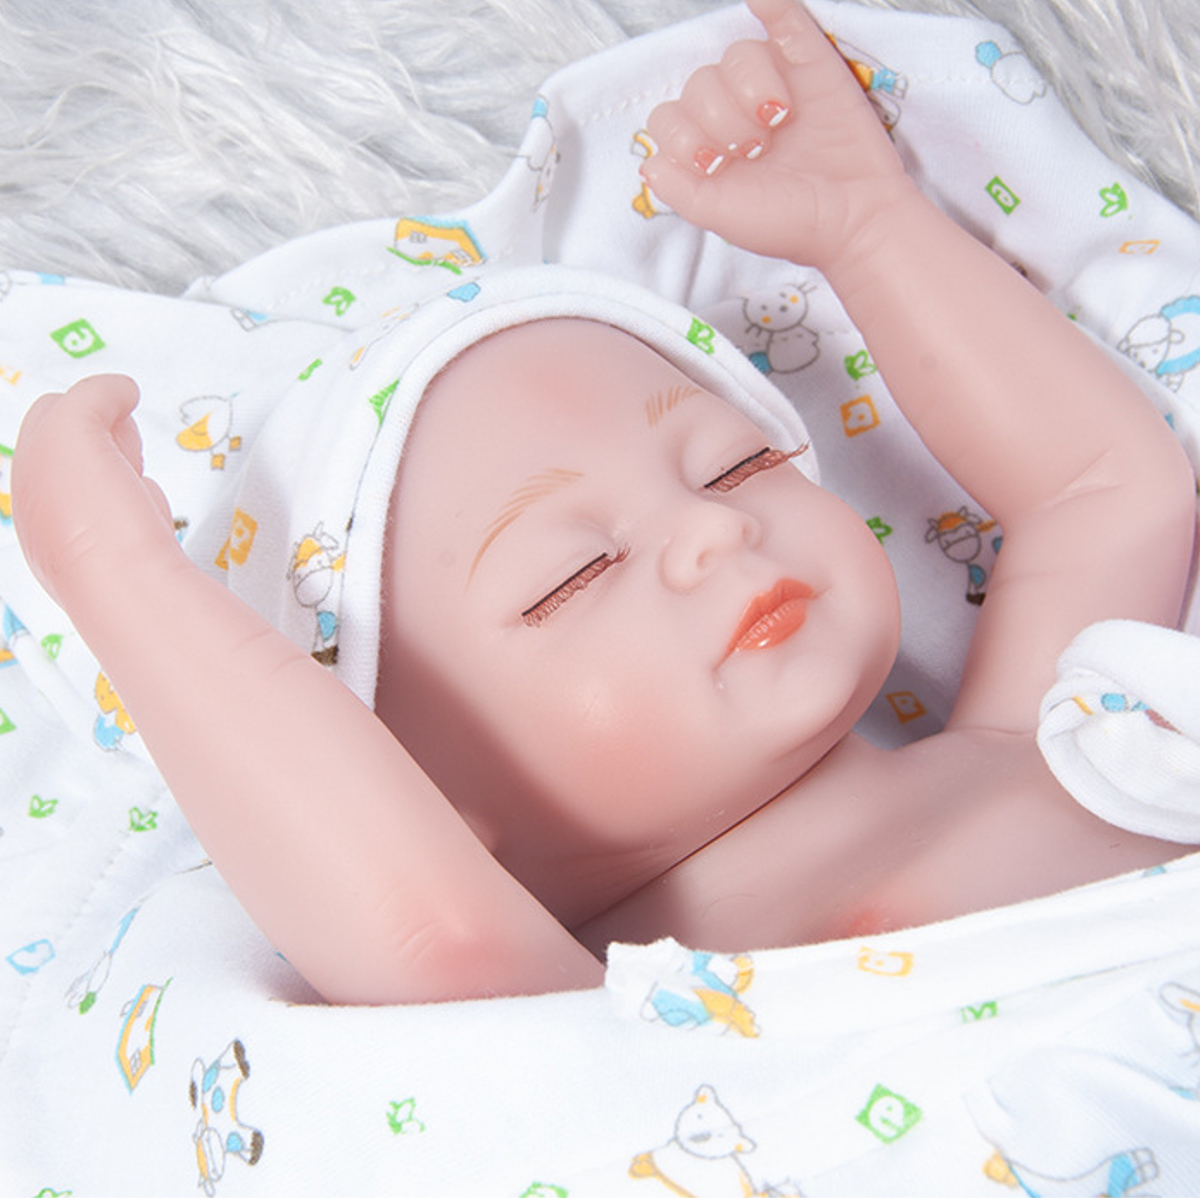 28CM-Soft-Silicone-Vinyl-Realistic-Sleeping-Reborn-Lifelike-Newborn-Baby-Doll-Toy-with-Moveable-Head-1731373-9